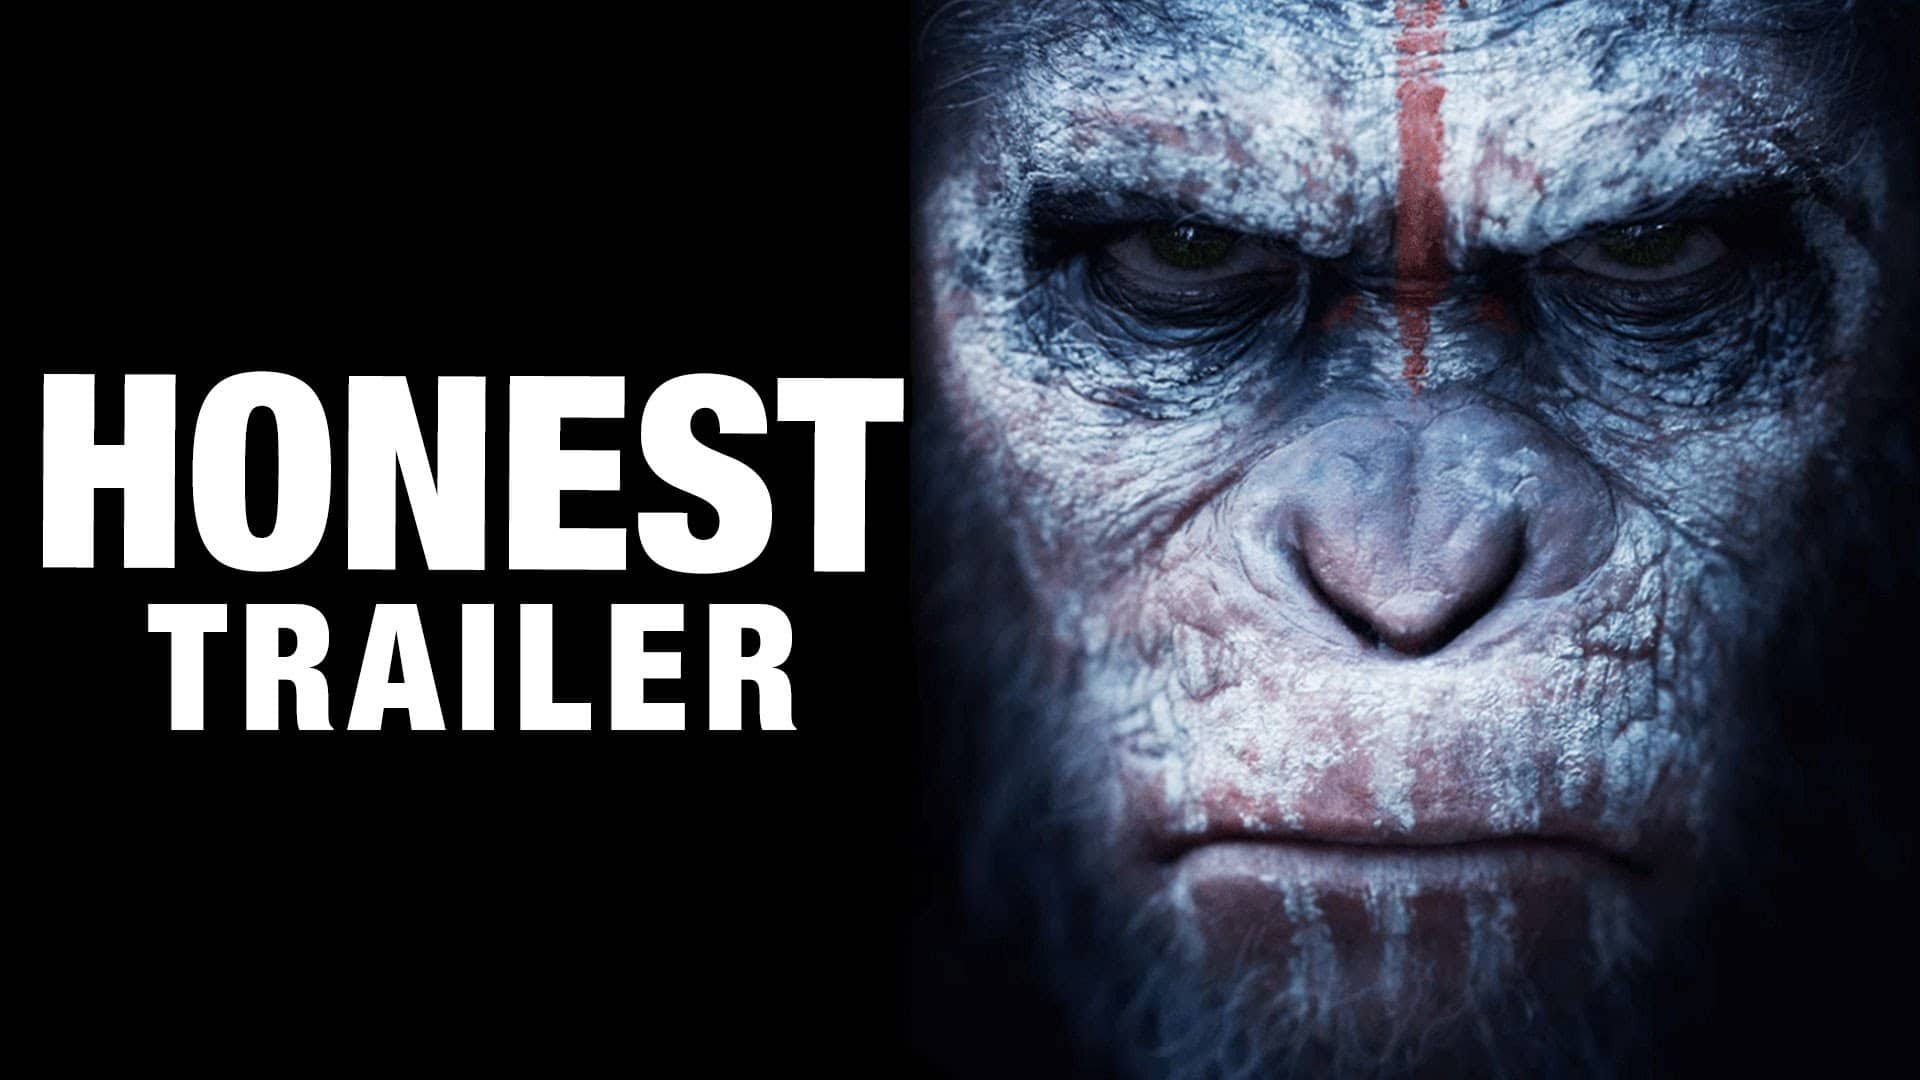 Den ærlige trailer: Dawn of the Planet of the Apes